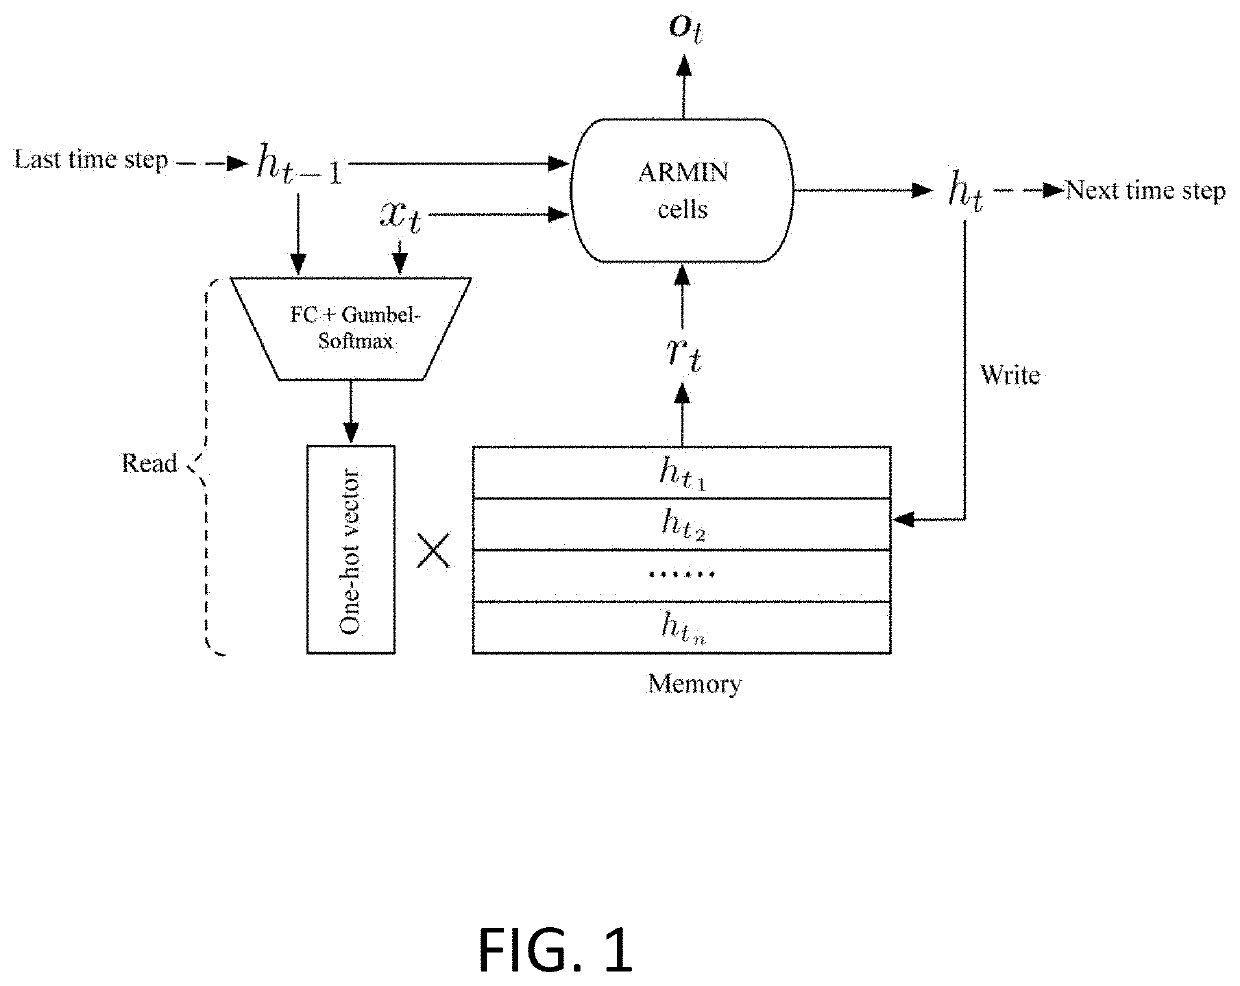 Memory network method based on automatic addressing and recursive information integration